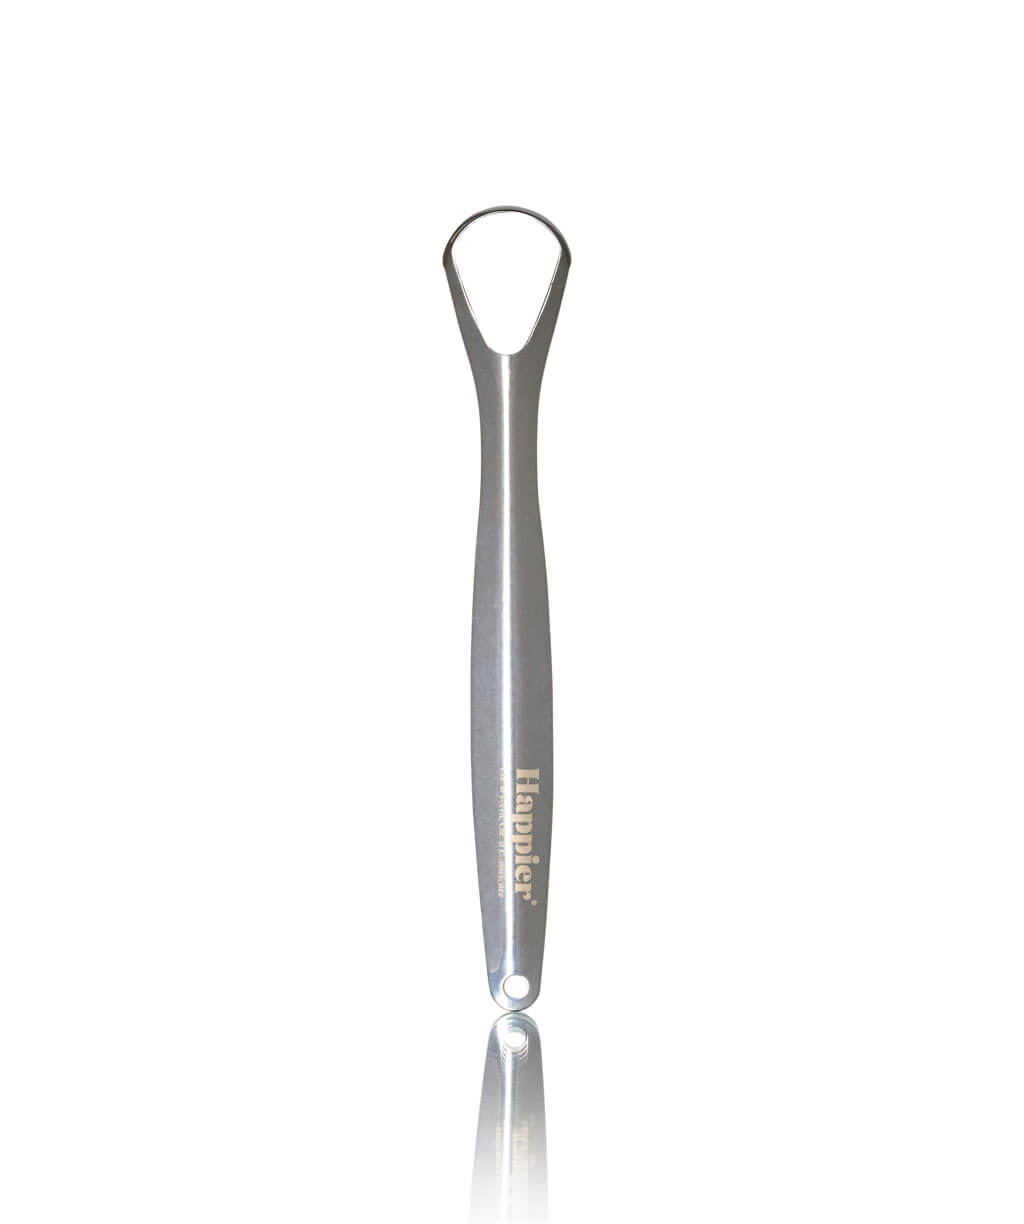 Happier stainless steel ergonomic tongue cleaner.